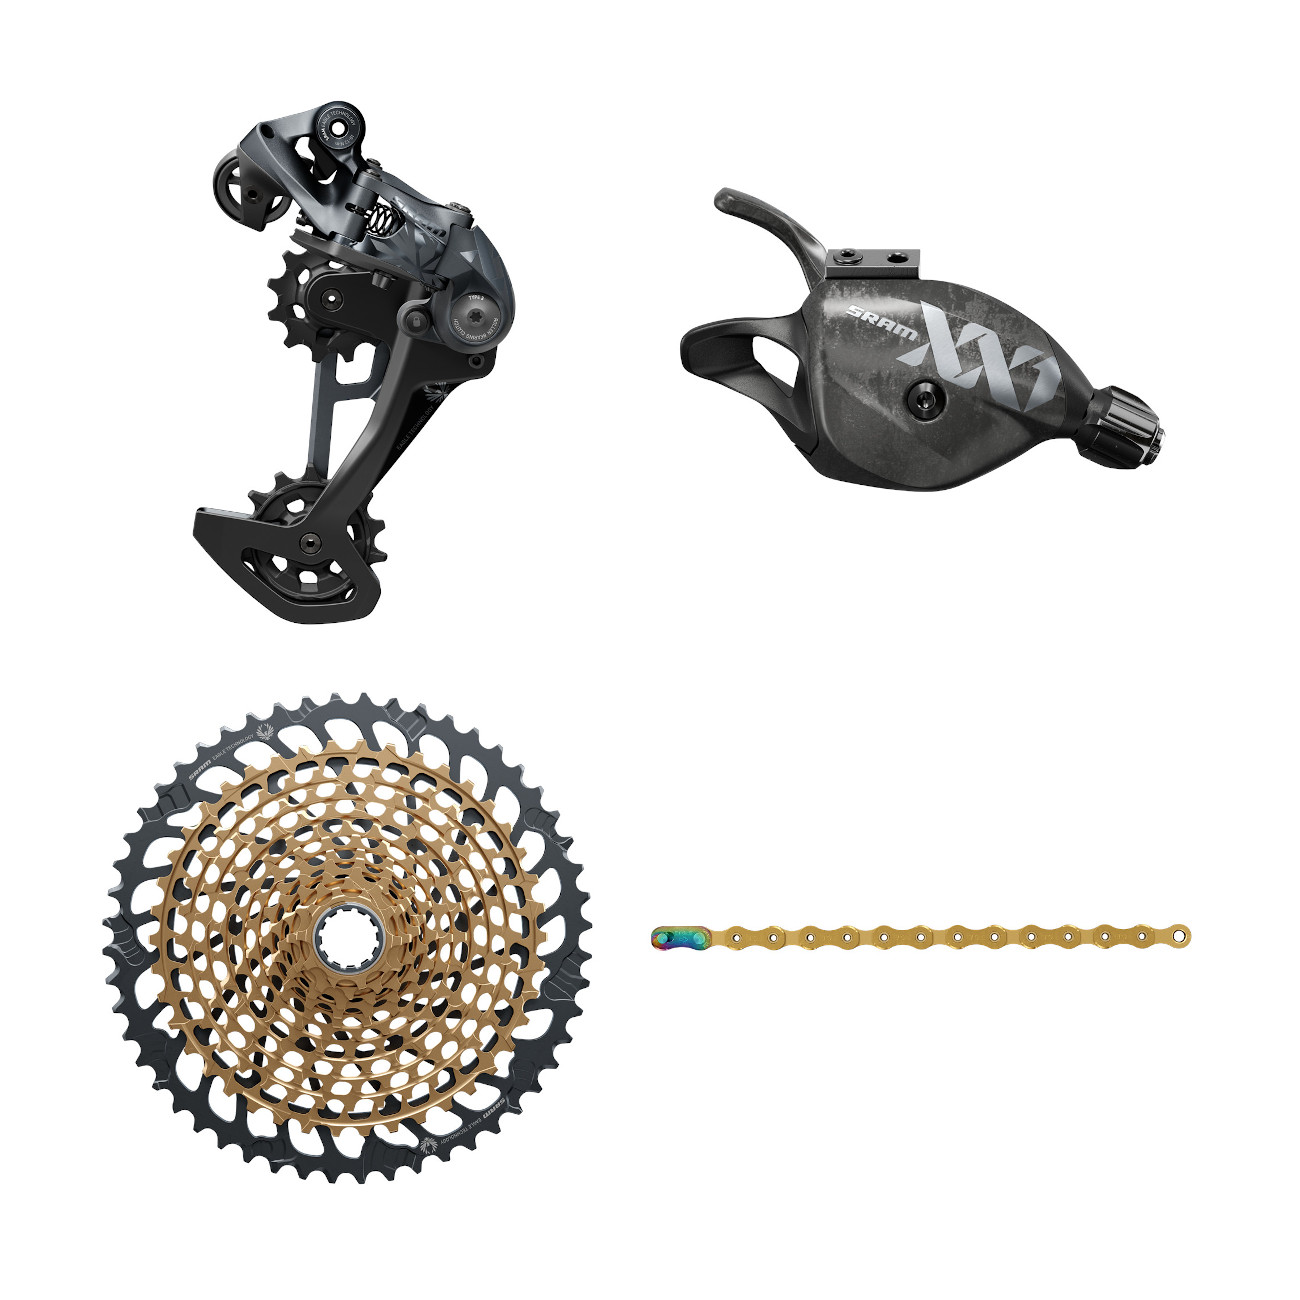 Picture of SRAM XX1 Eagle 1x12-speed Upgrade Kit - Trigger Shifter - 10-52 t. XG-1299 Cassette - Gold